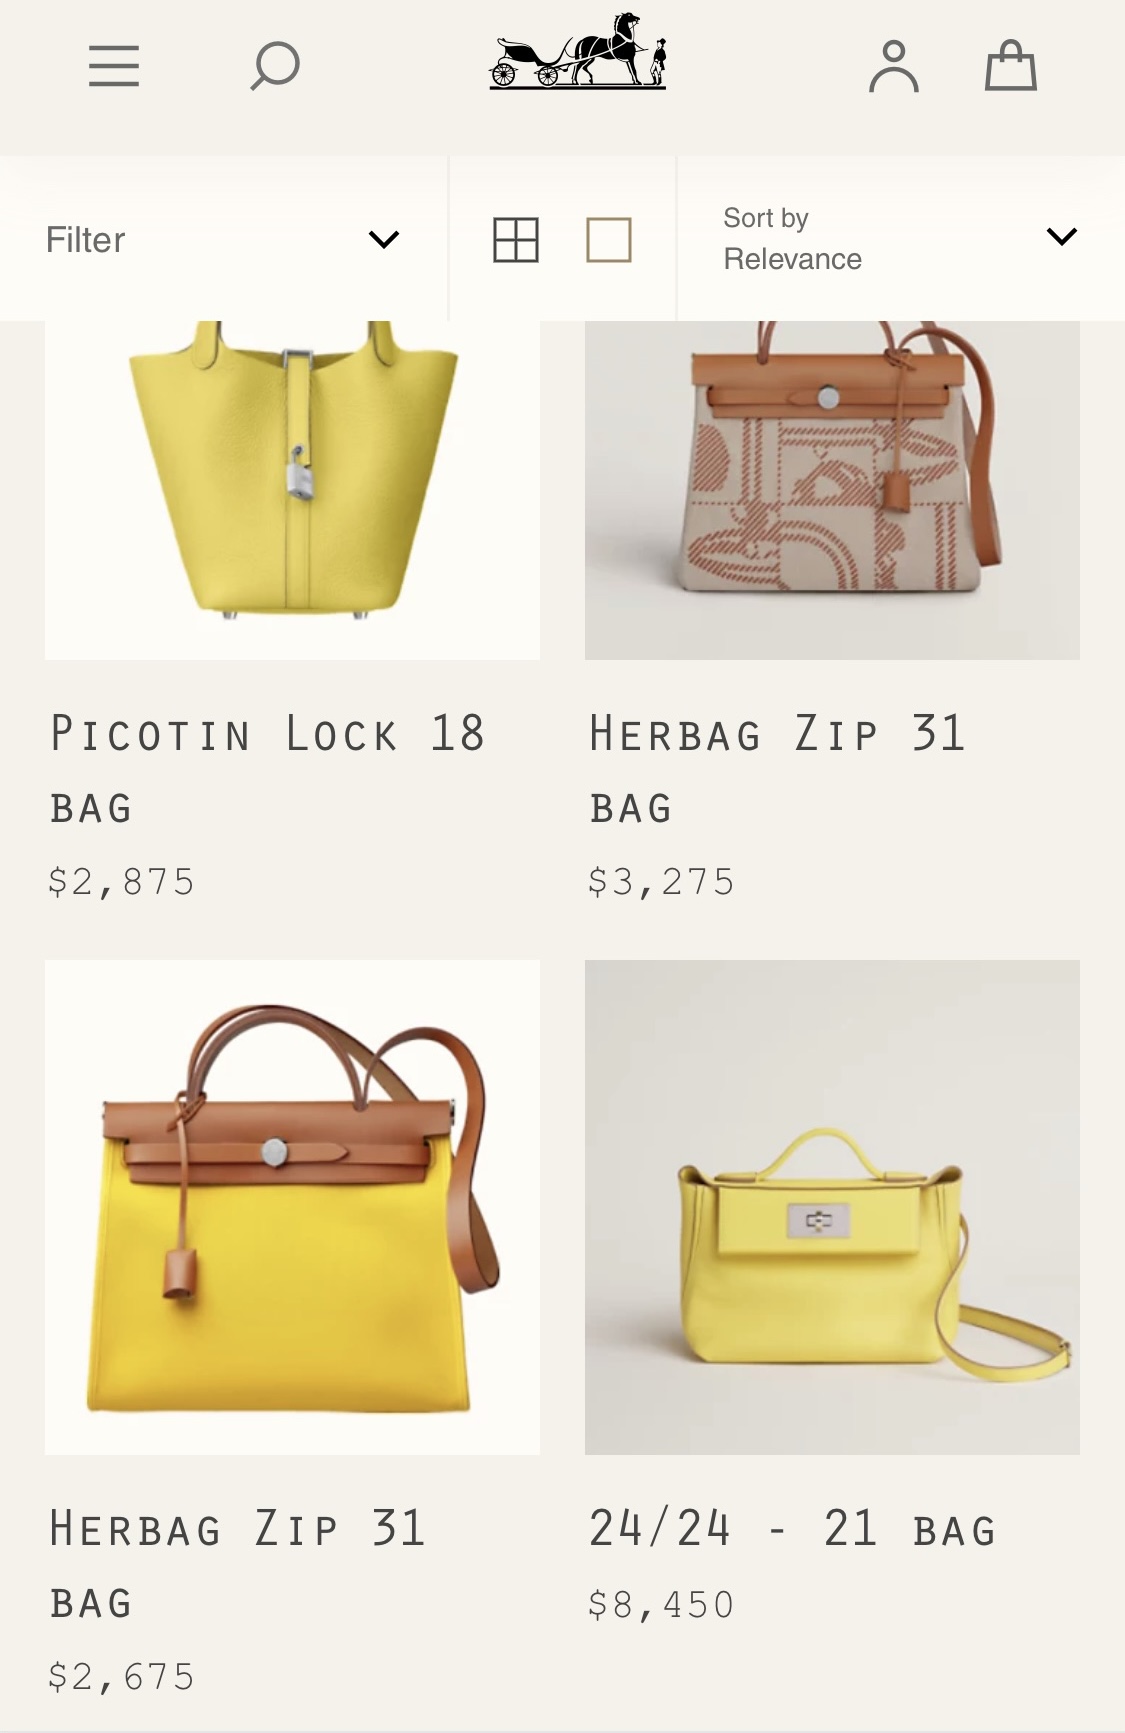 Why is it so Hard to Buy a Hermès Bag Online?